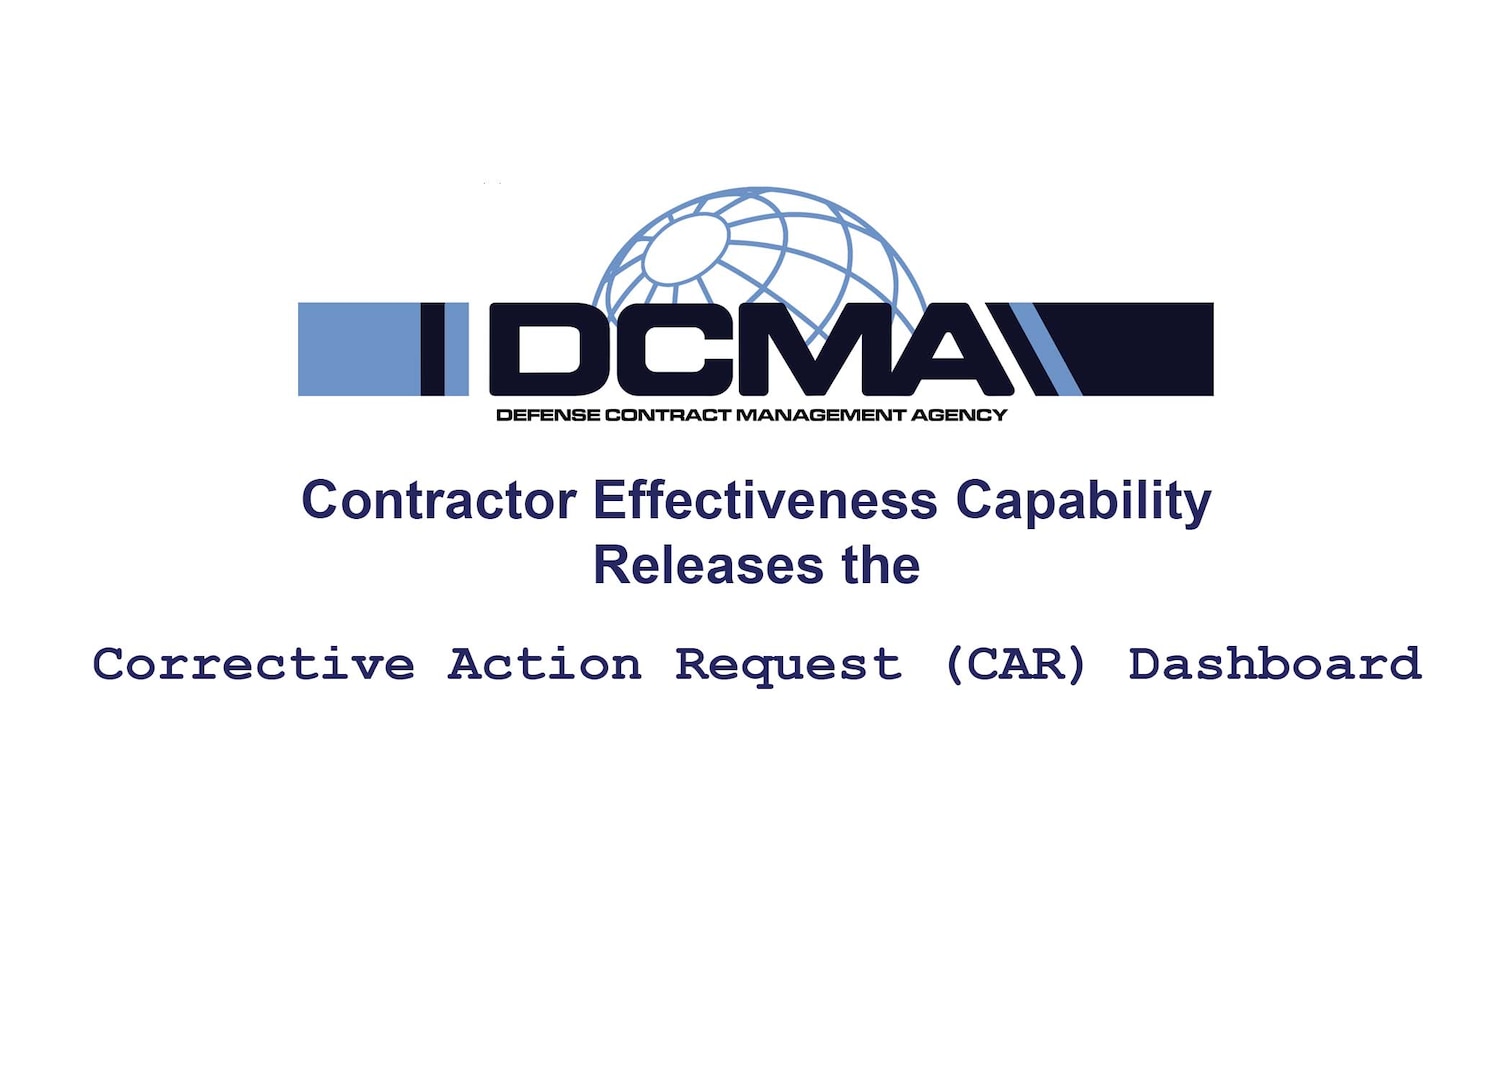 Contractor Effectiveness Capability Releases the Corrective Action Request Dashboard.